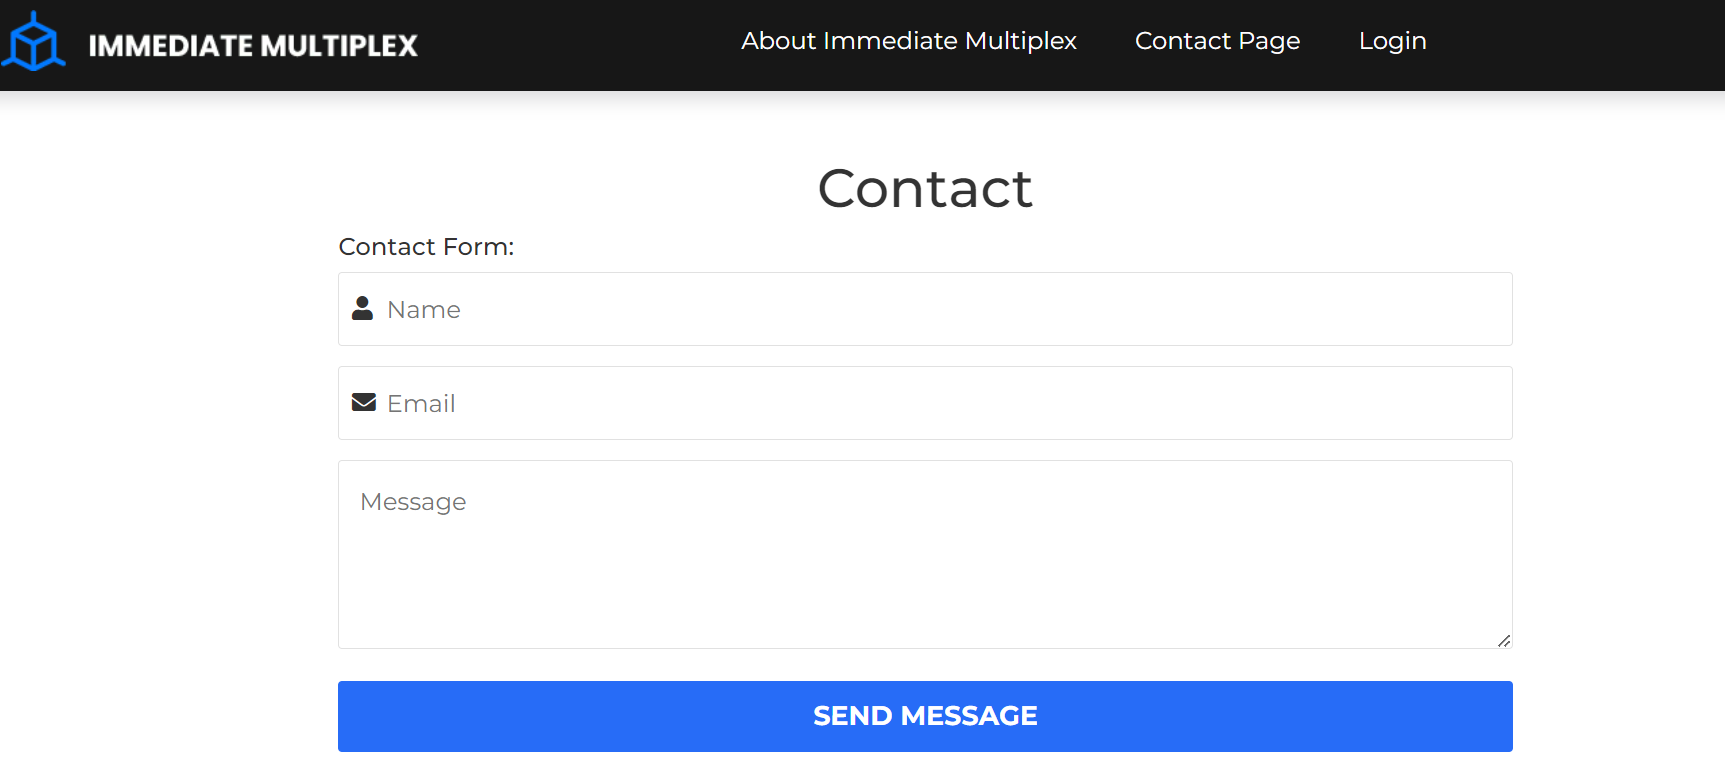 Immediate Multiplex Contact Page